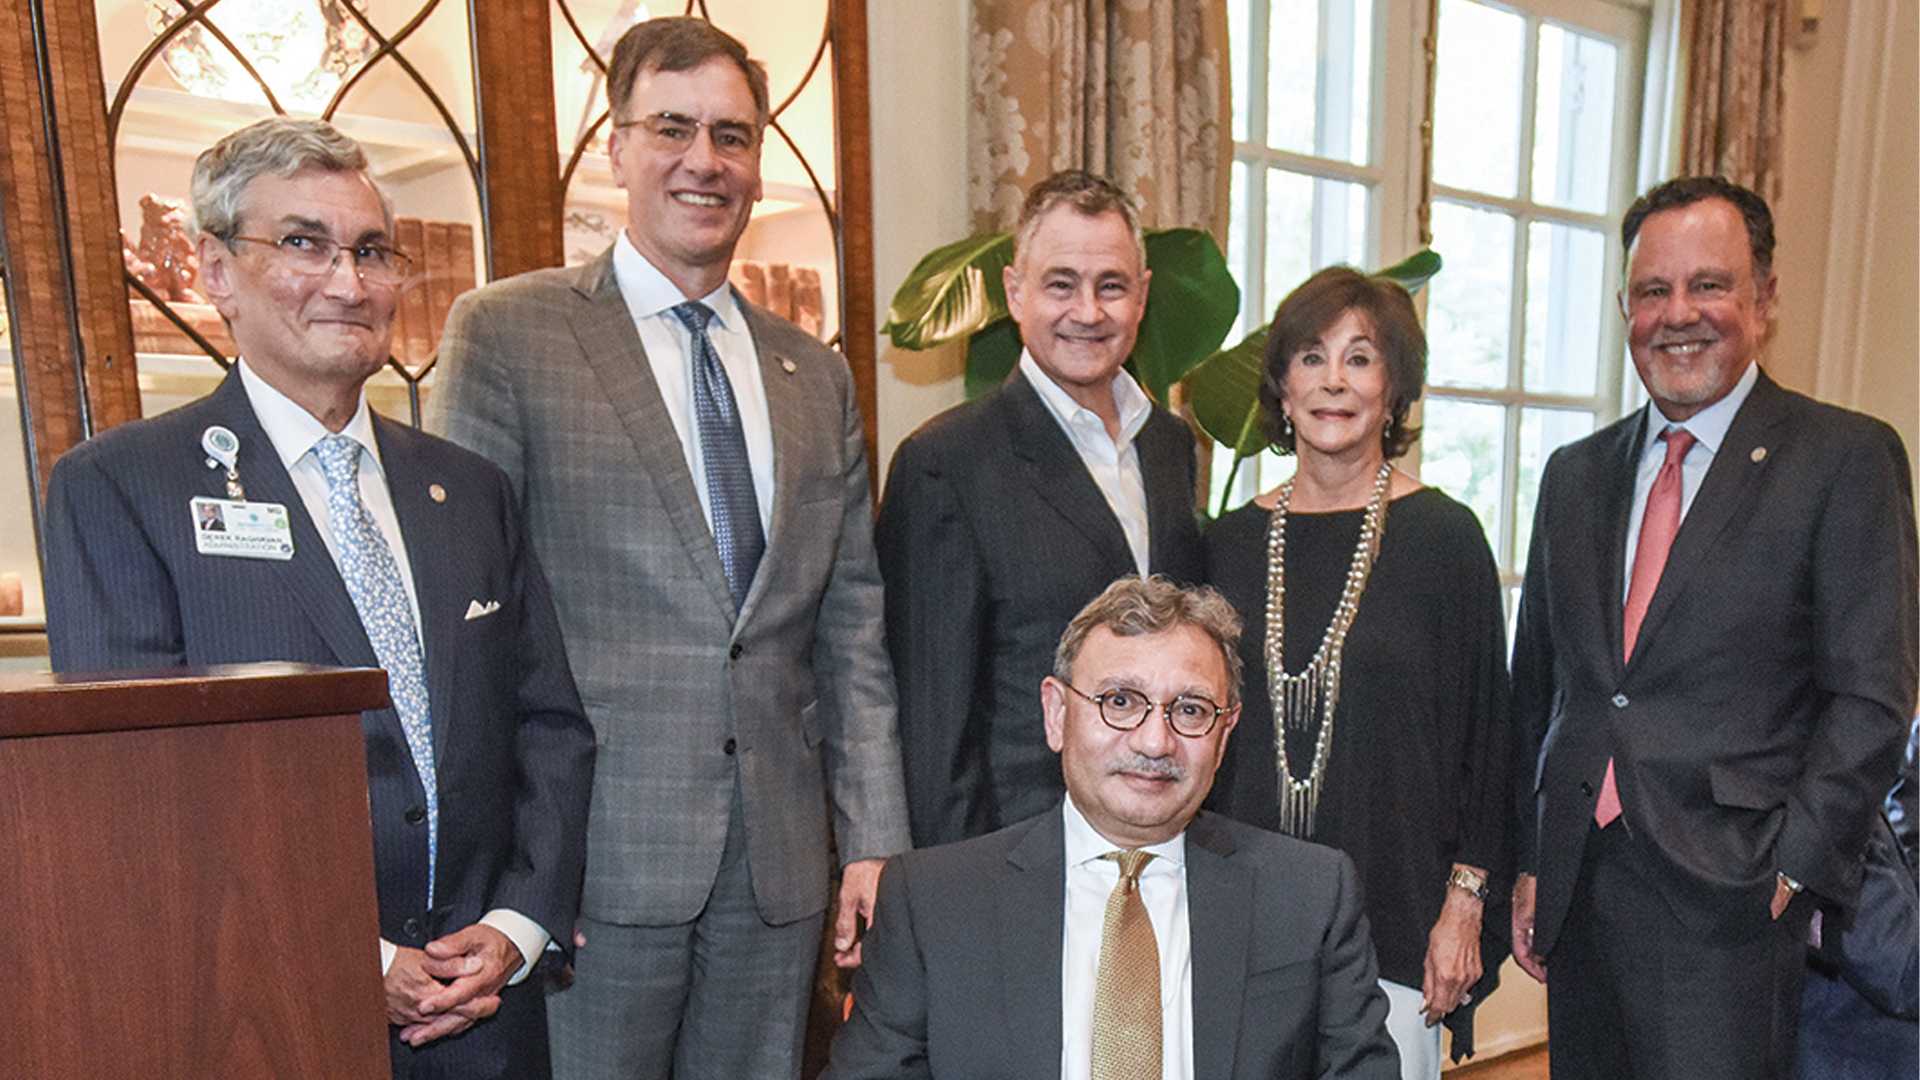 Dr. Asim Amin, director of immunotherapy at Levine Cancer Institute, is the first recipient of the chair. He was honored at a private investiture ceremony.